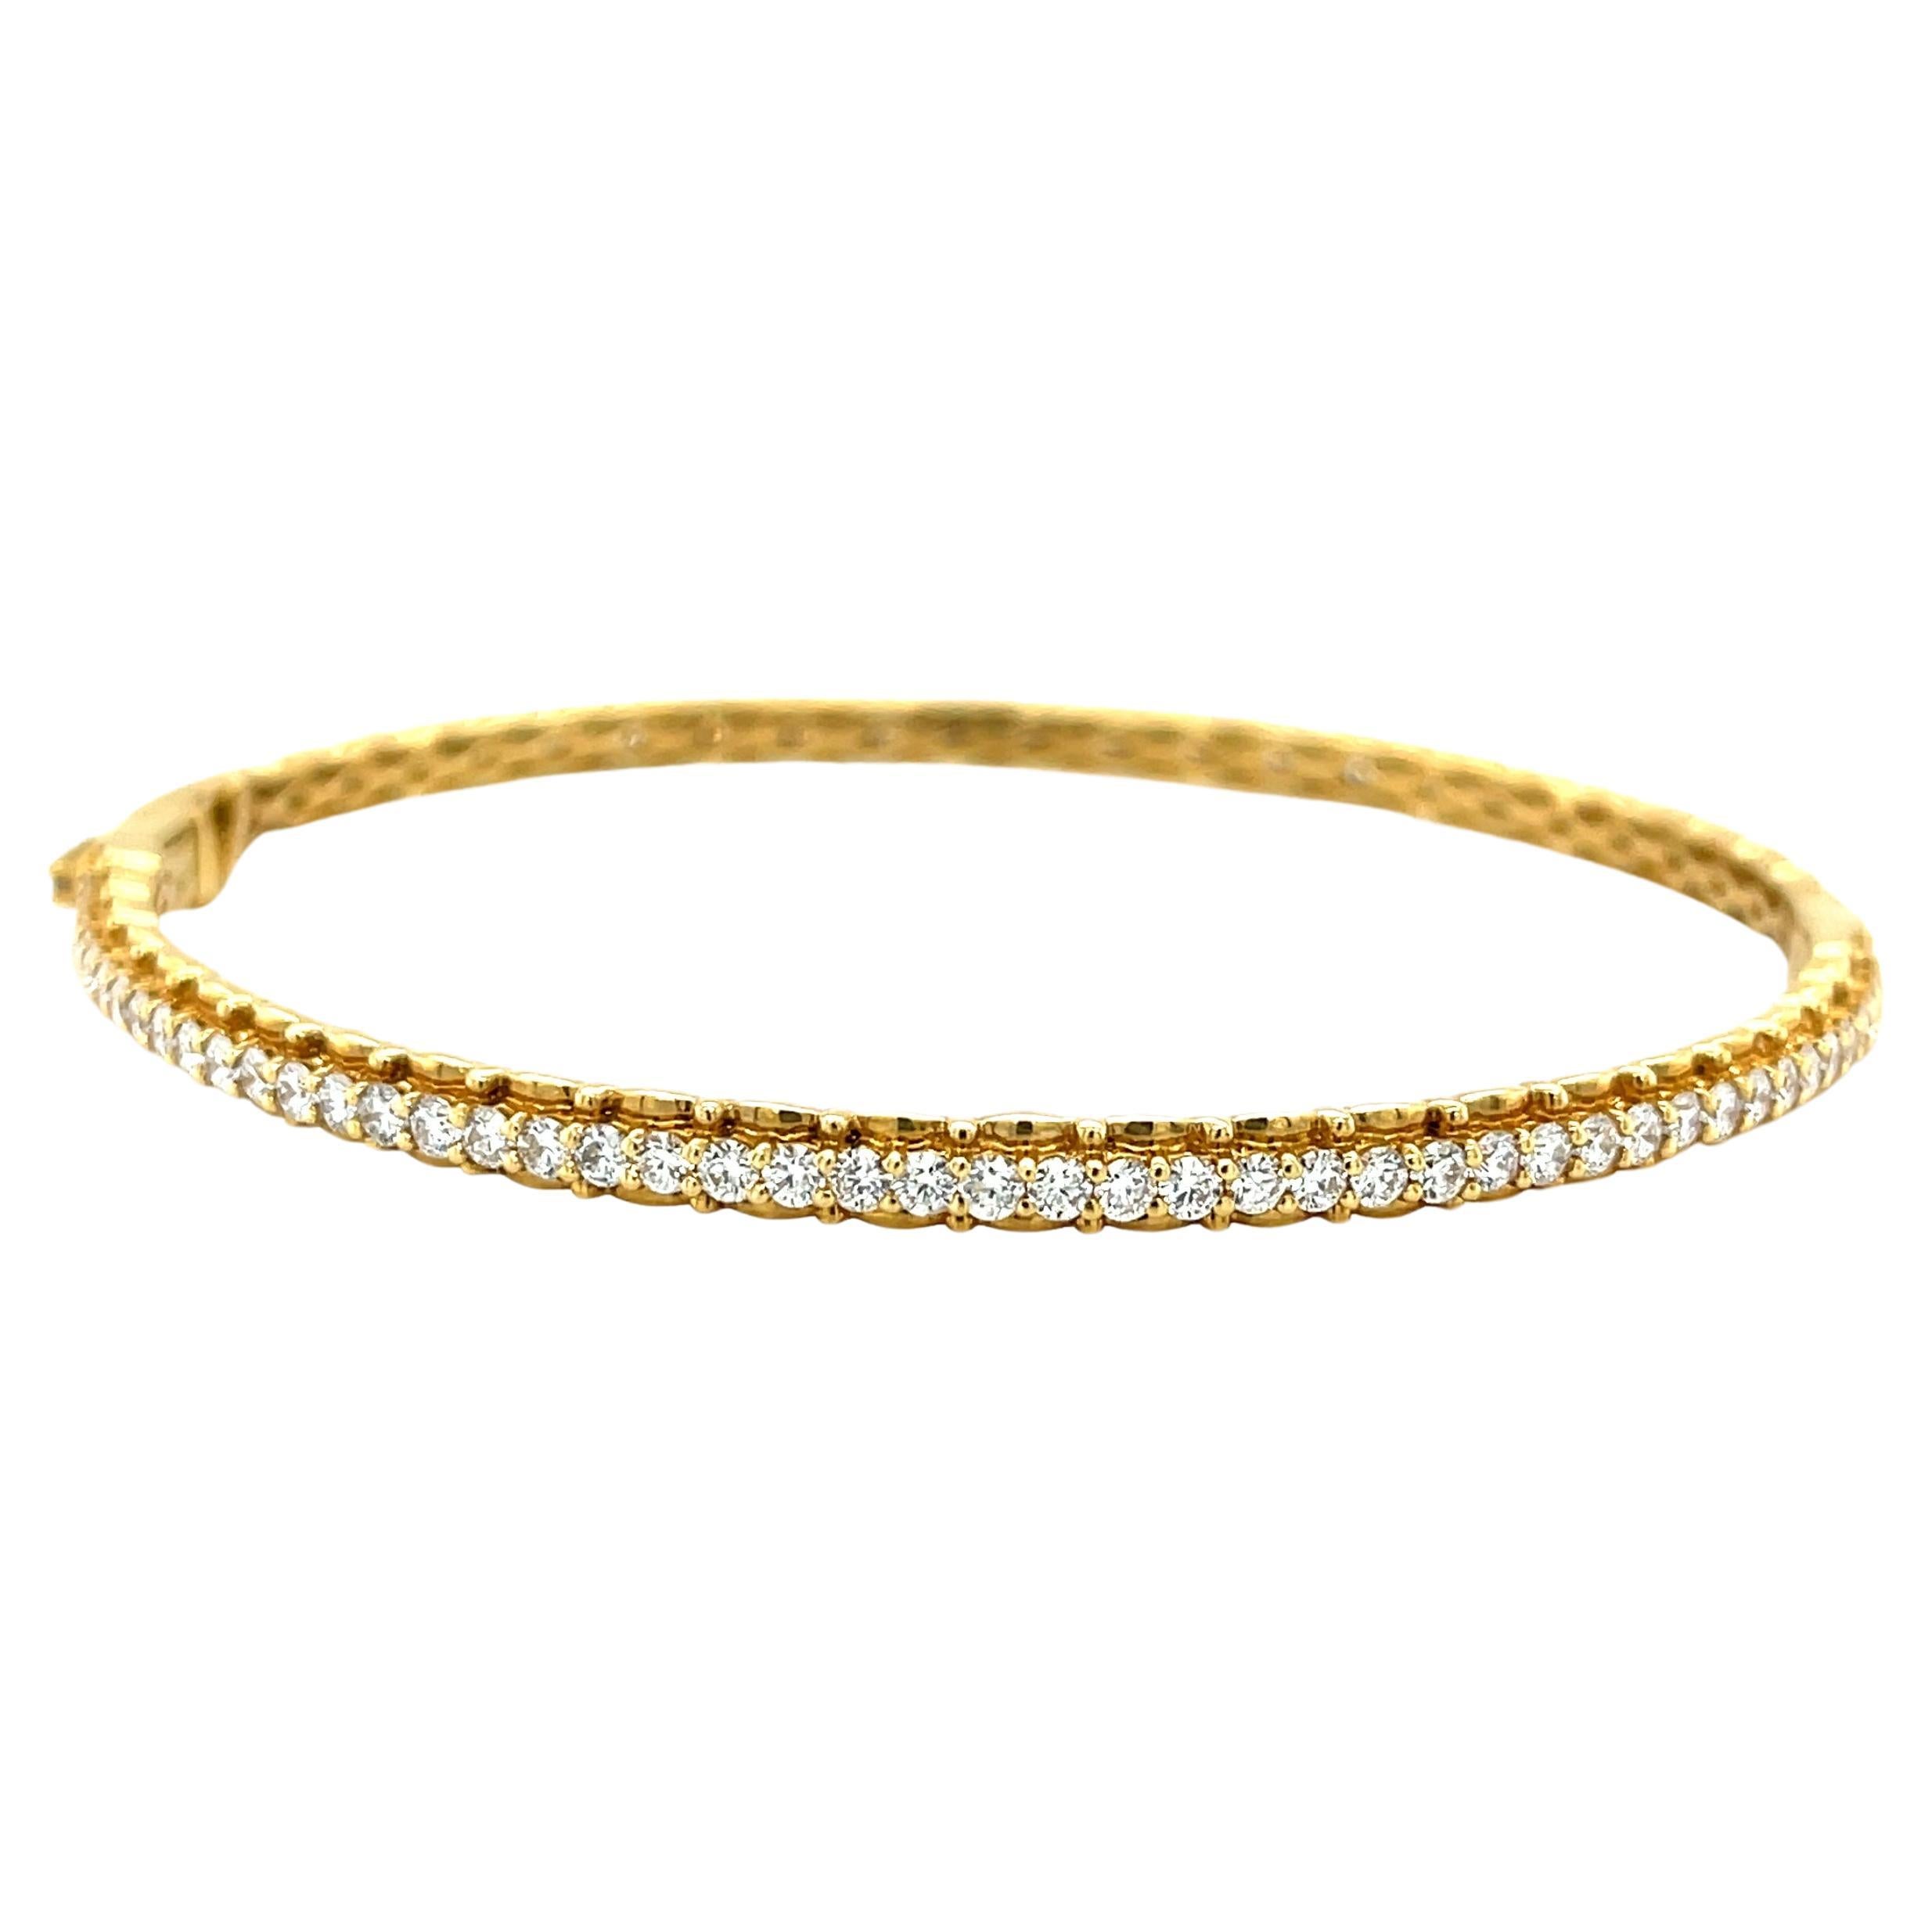 Diamond and Yellow Gold Circle Bangle Bracelet, 2.63 Carats Total For Sale